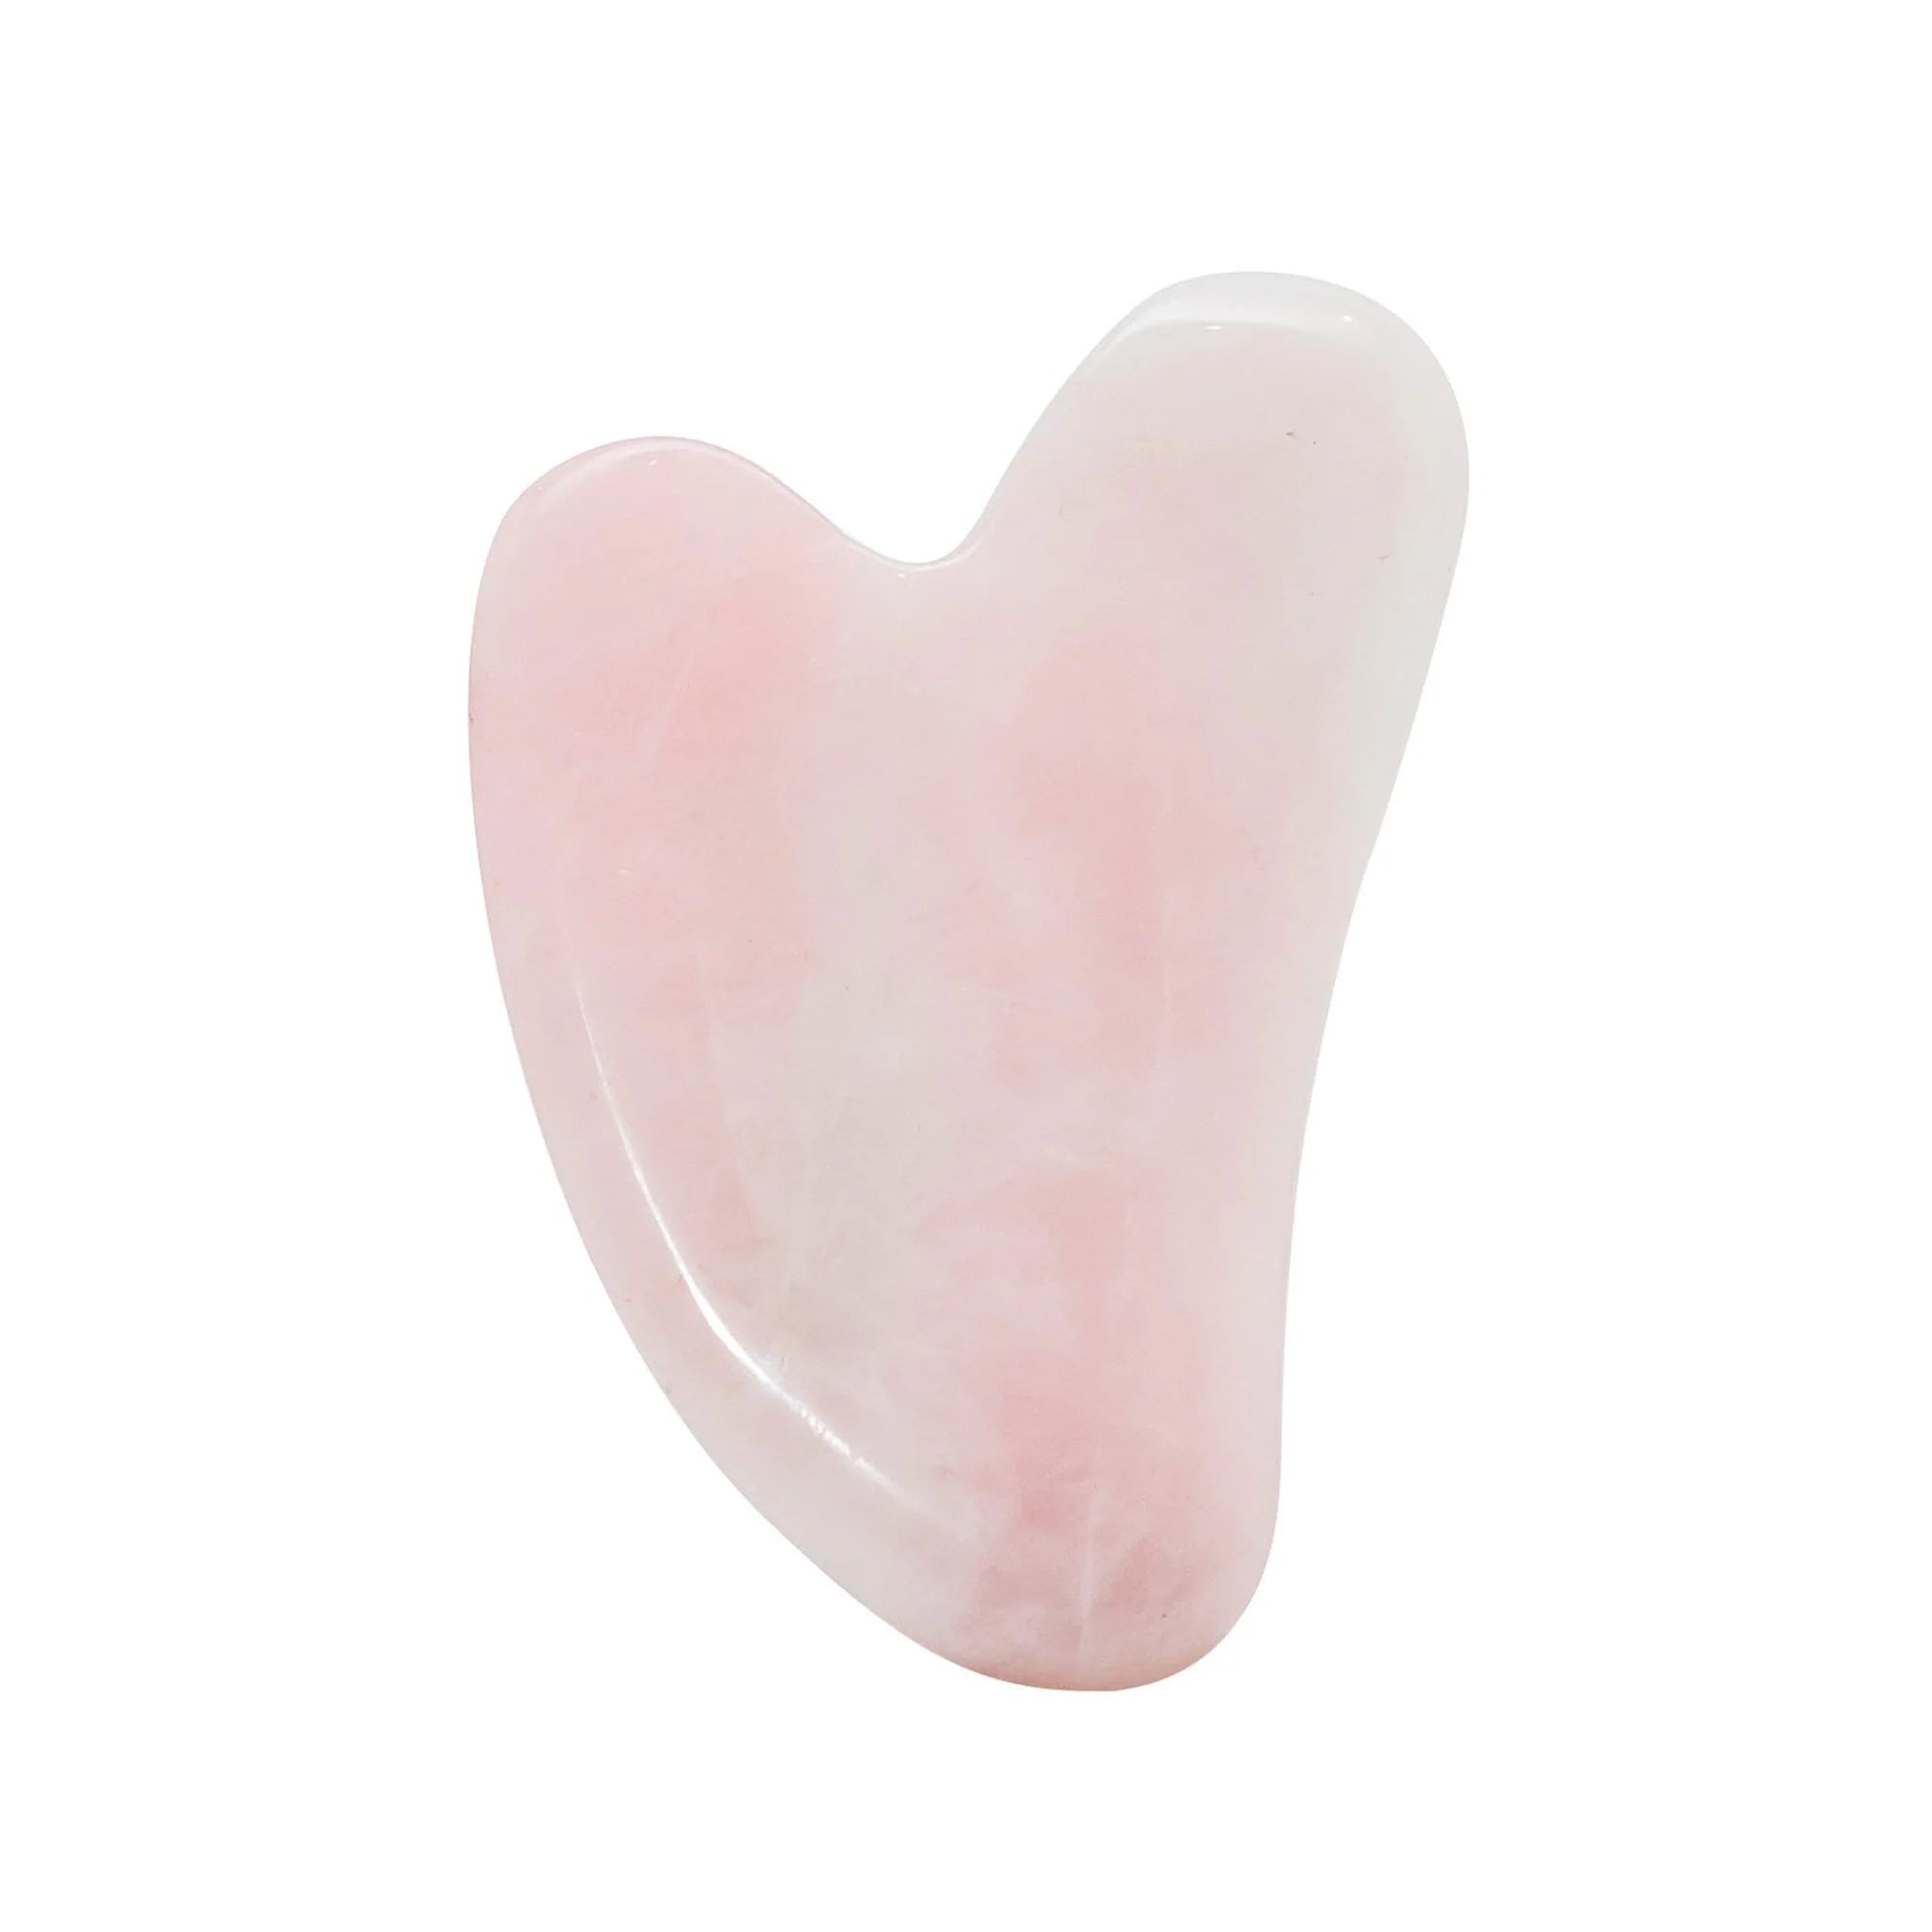 Experience the soothing effects of our expertly crafted Rose Quartz Gua Sha tool for relieving facial tension